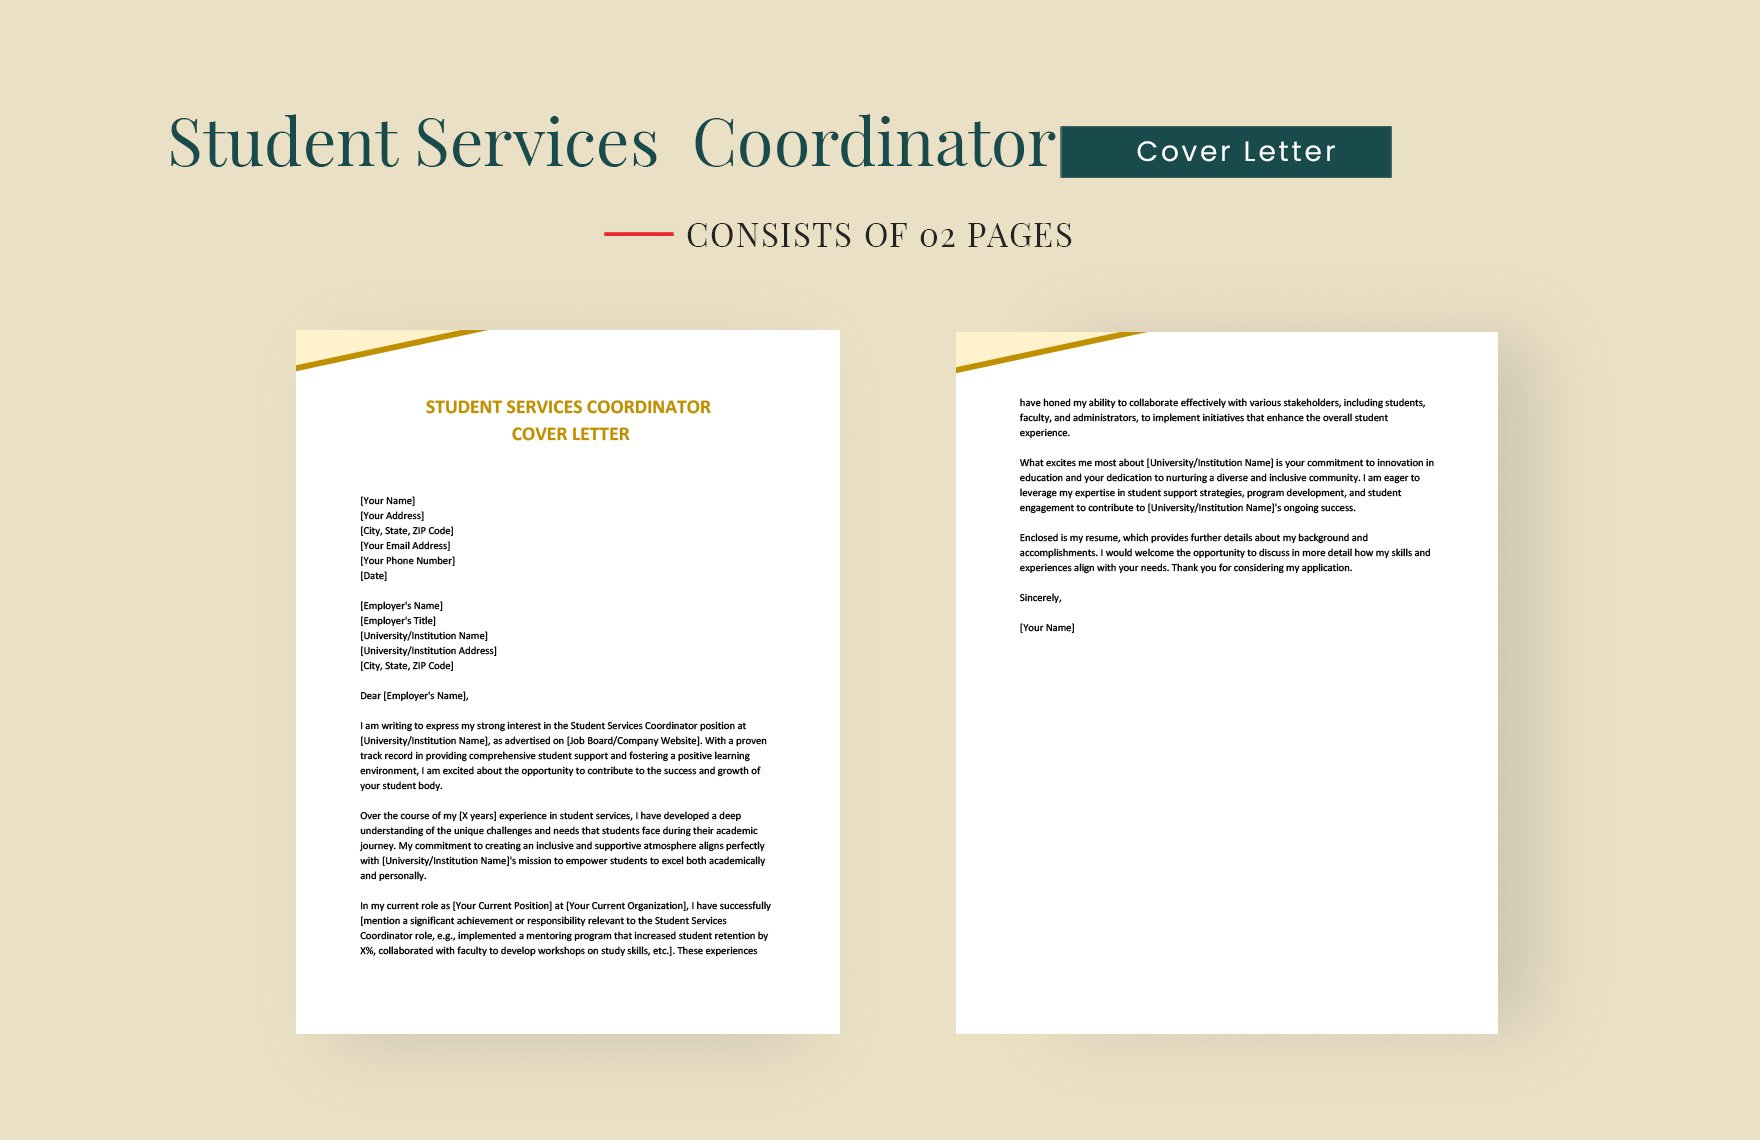 Student Services Coordinator Cover Letter in Word, Google Docs